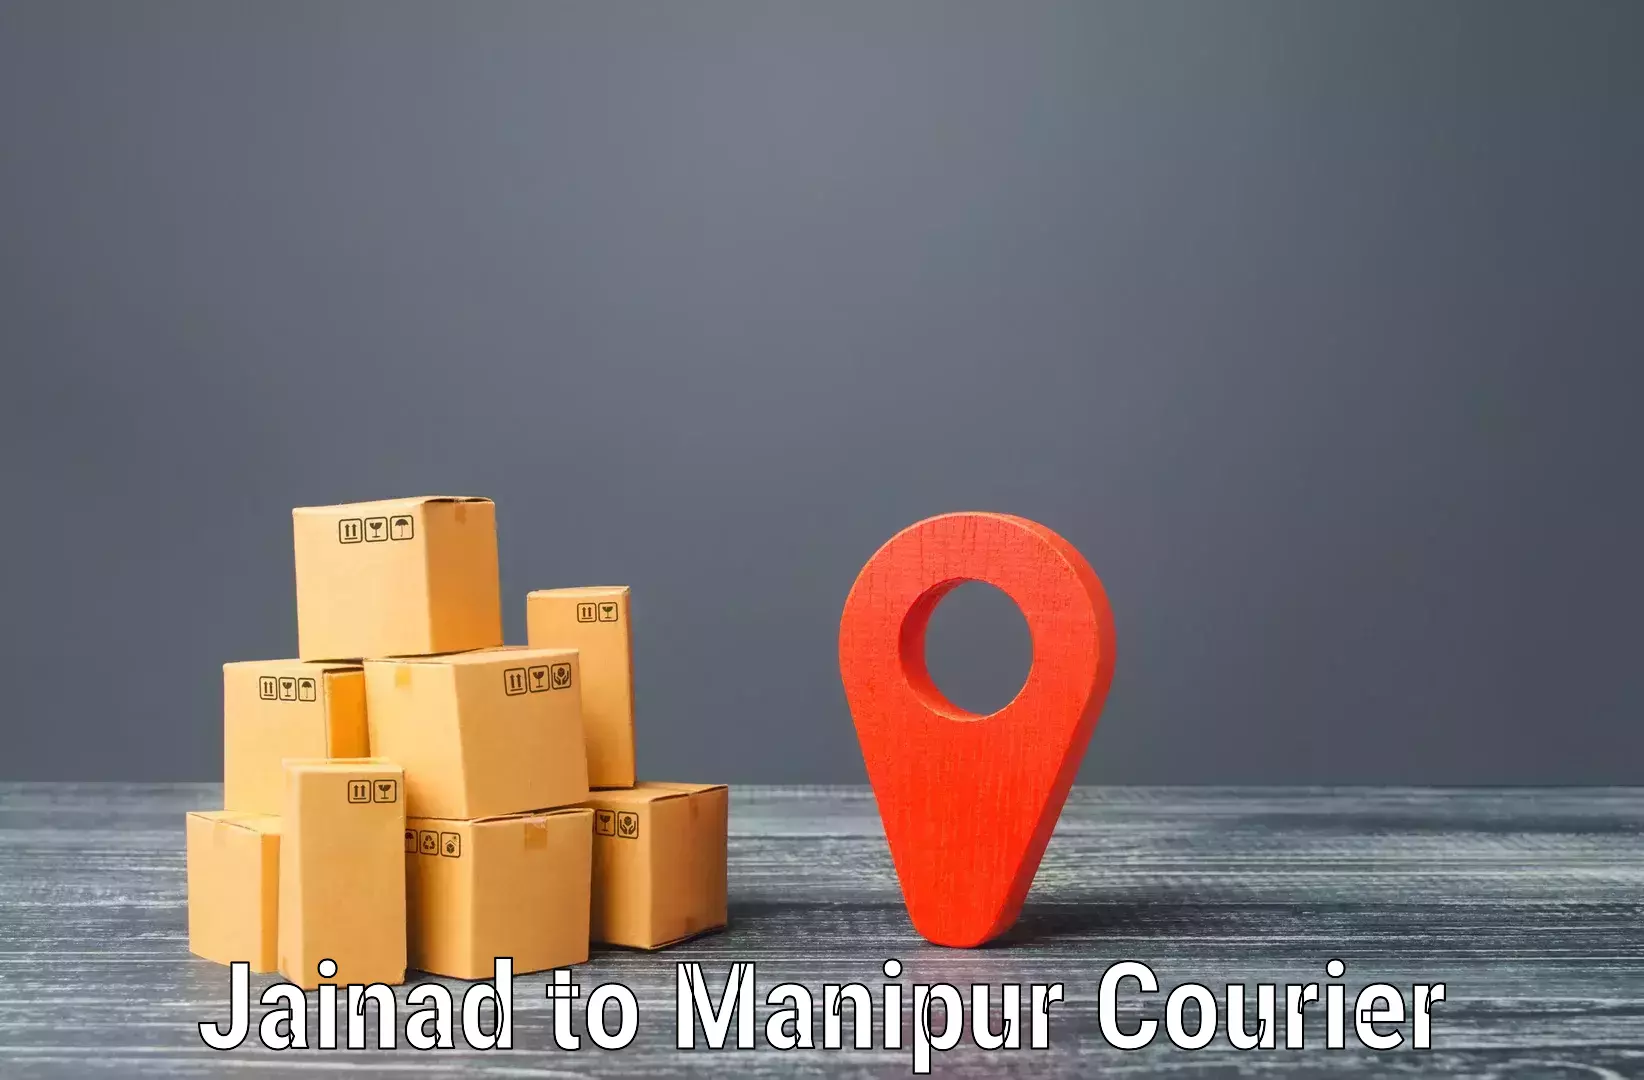 Specialized courier services in Jainad to Kaptipada